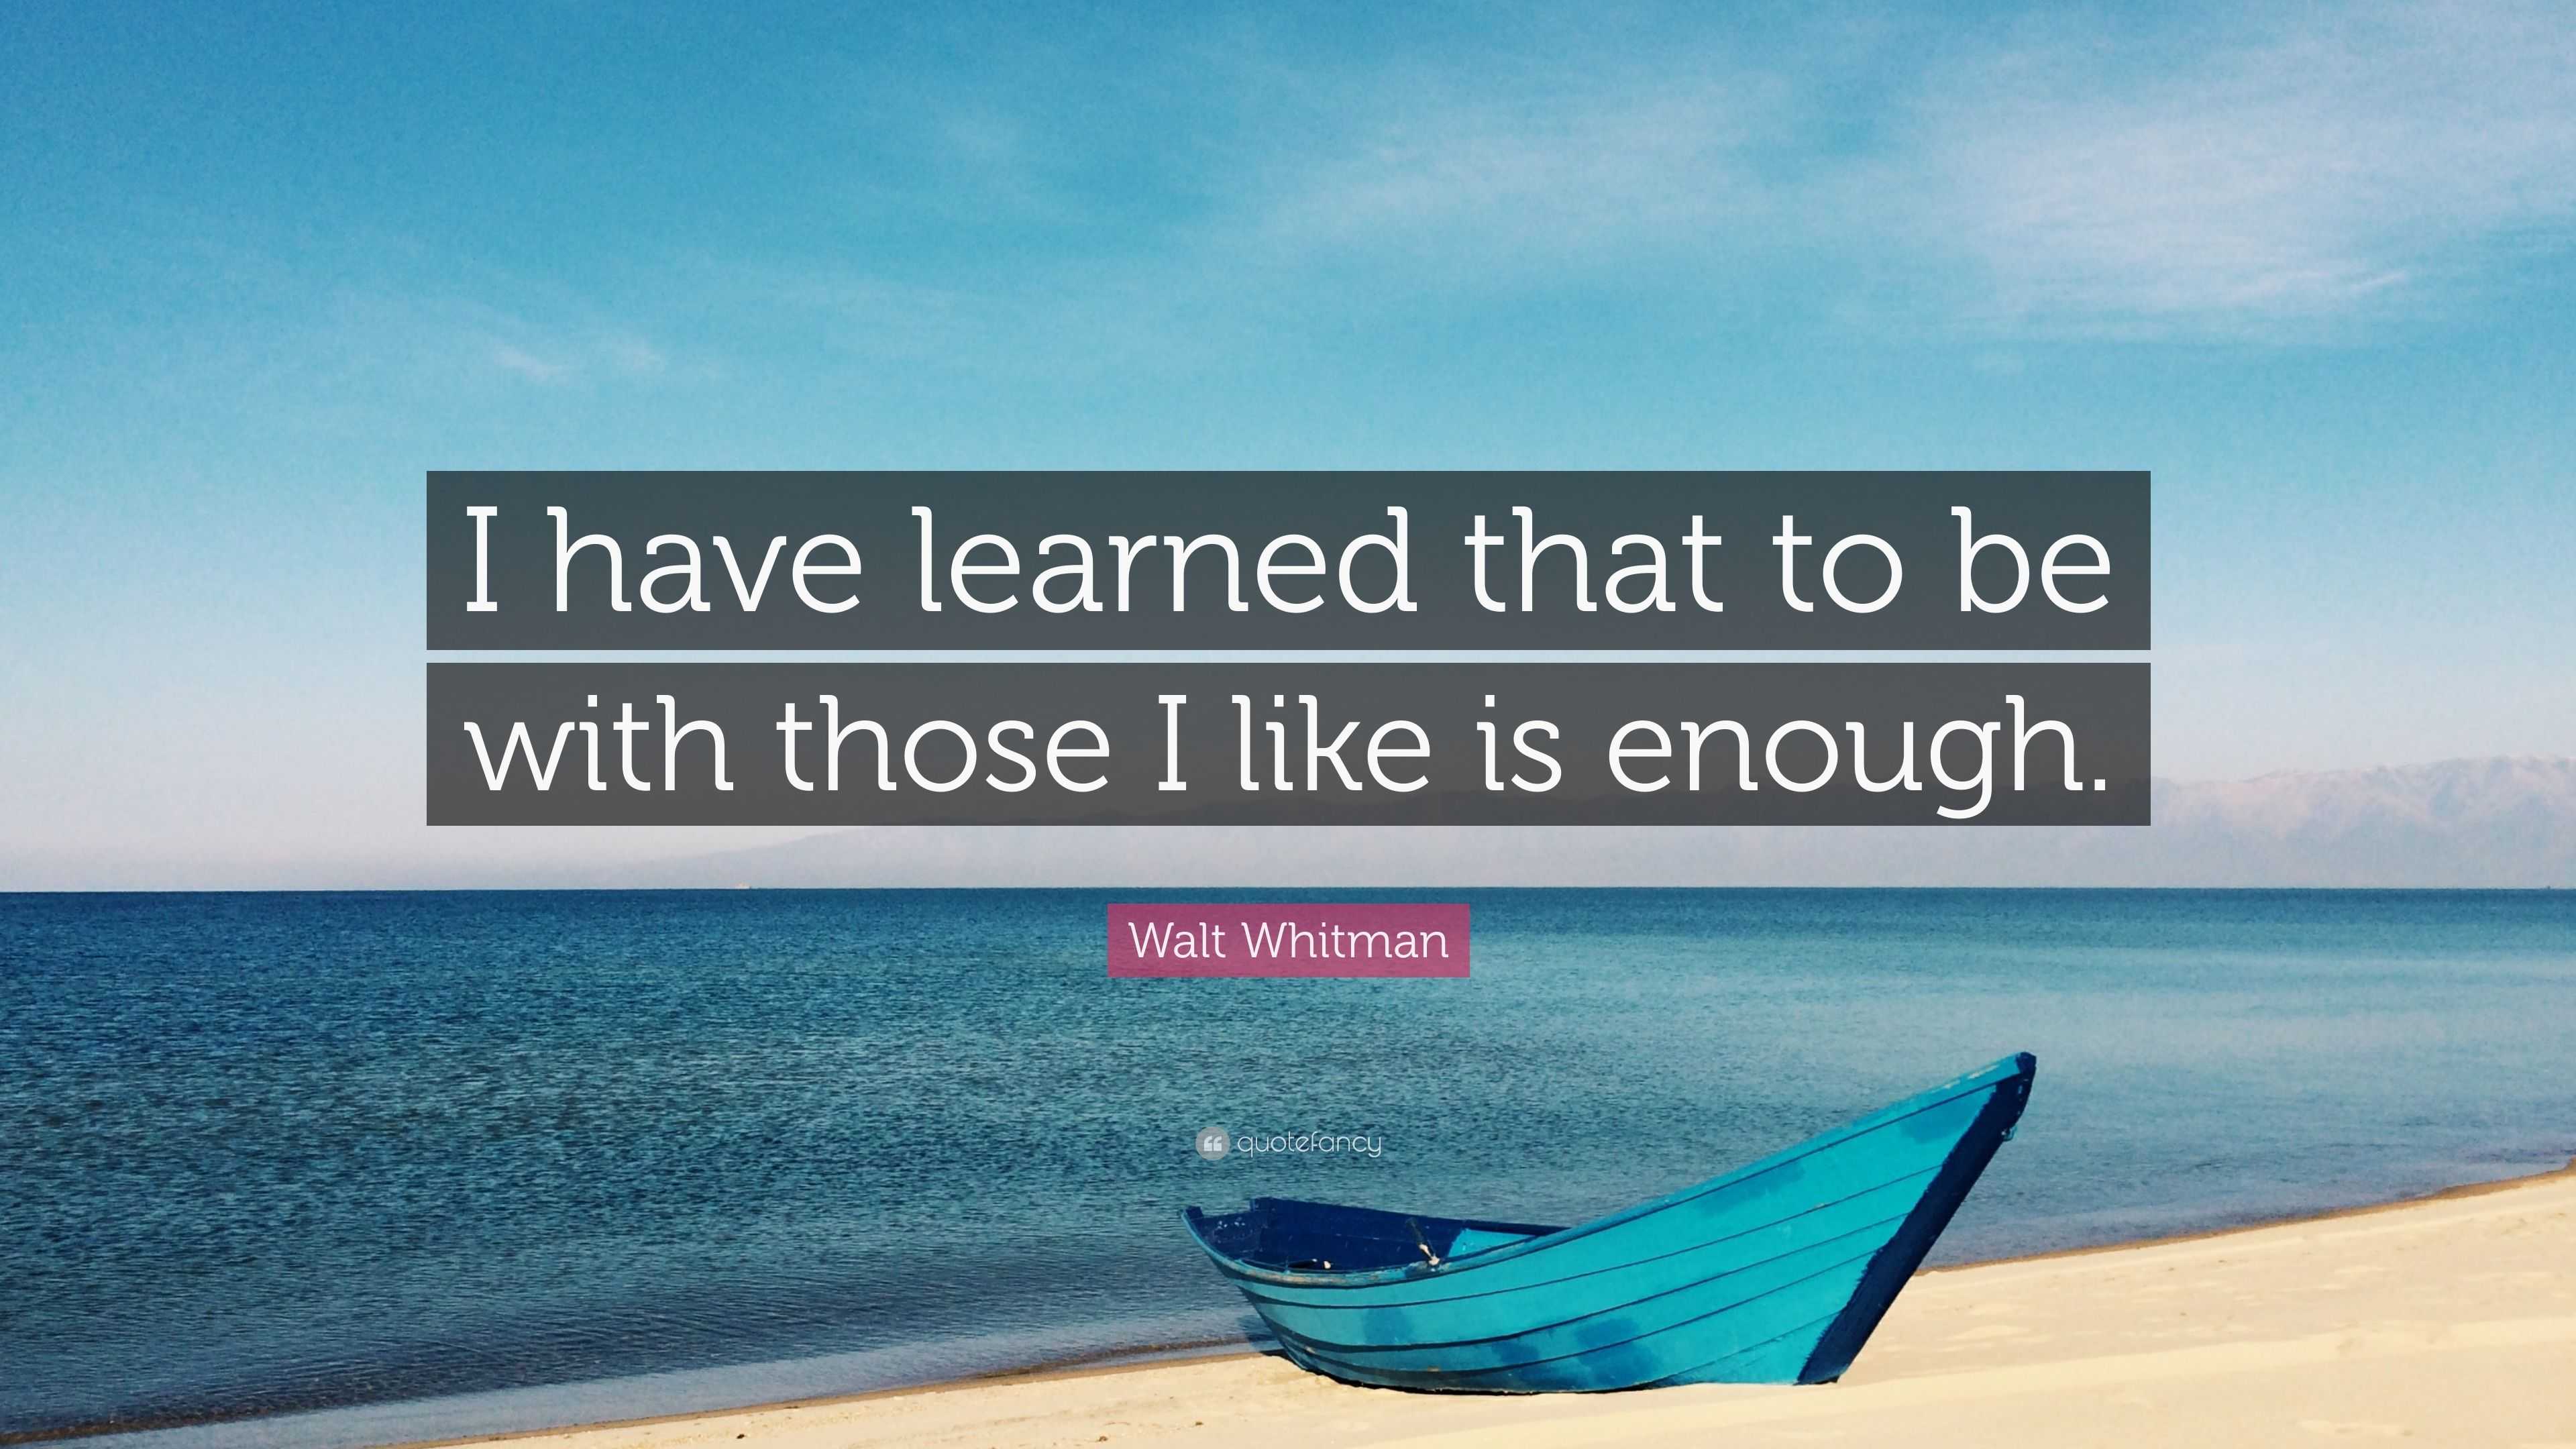 Walt Whitman Quote: “I have learned that to be with those I like is ...